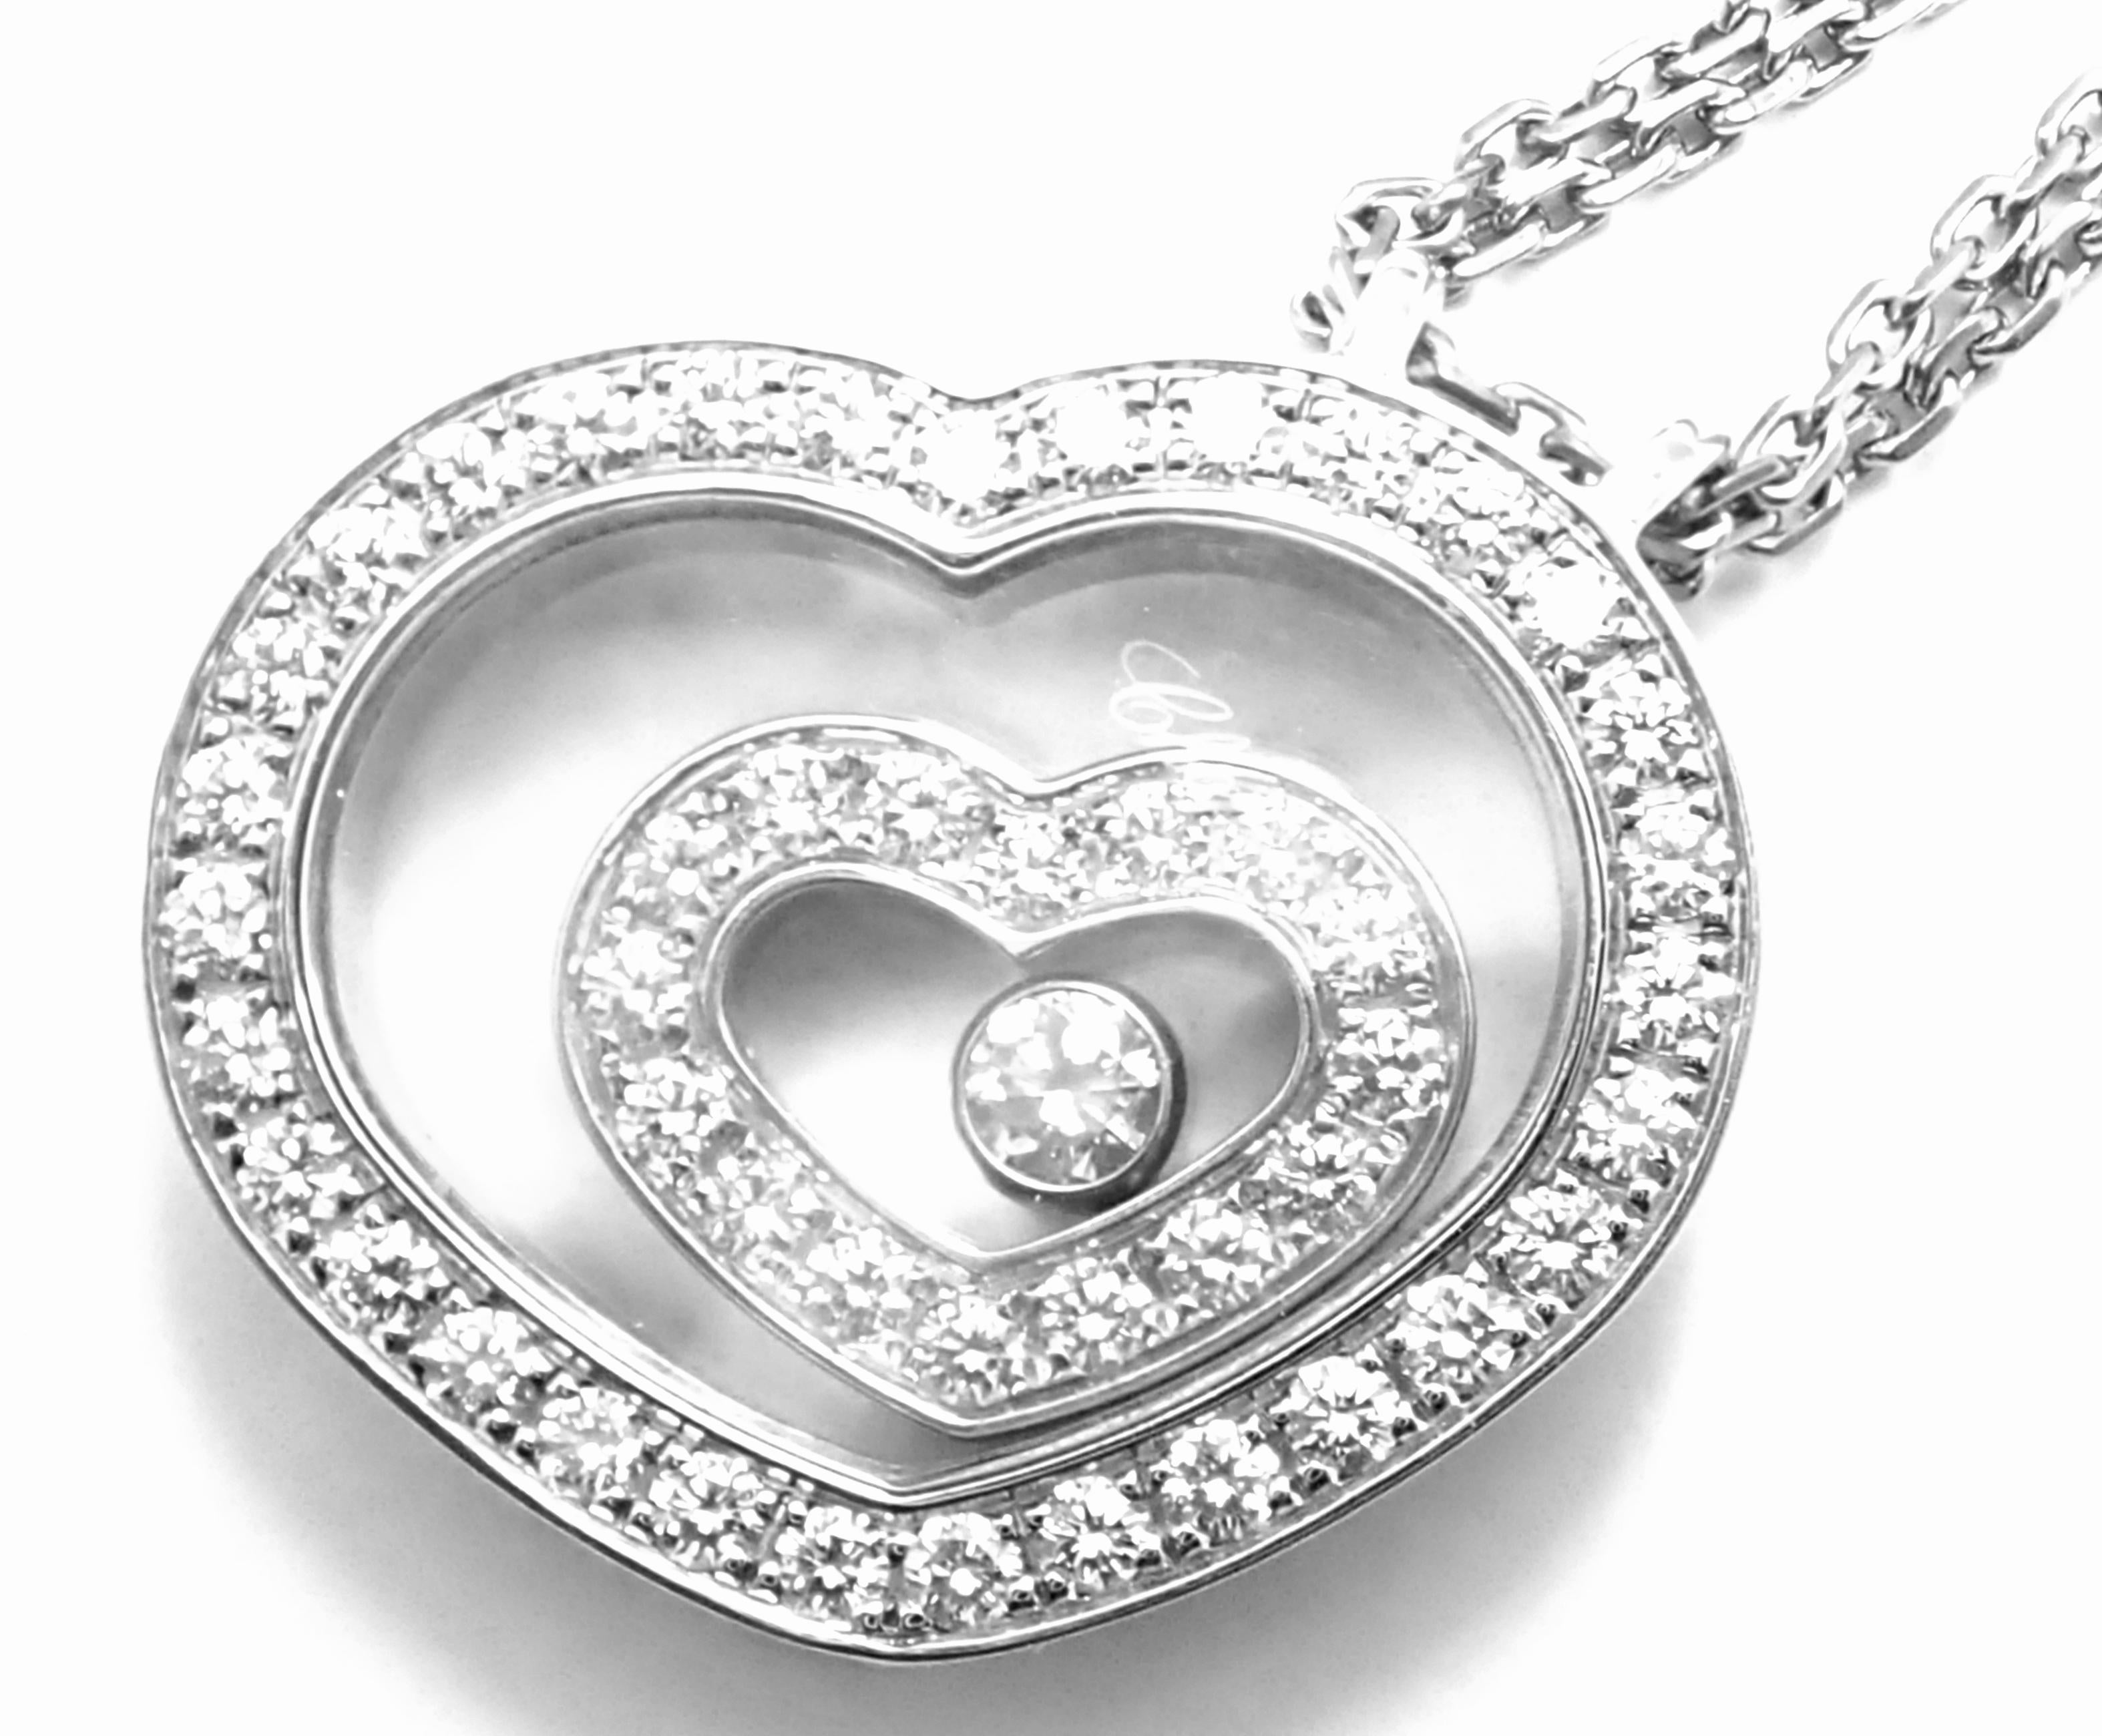 18k White Gold Happy Spirit Diamond Heart Pendant Necklace by Chopard. 
With 48 round brilliant cut diamonds = VVS1 clarity, E color total weight .86ct
This necklace comes with the box and a certificate from Chopard.

This necklace comes with the